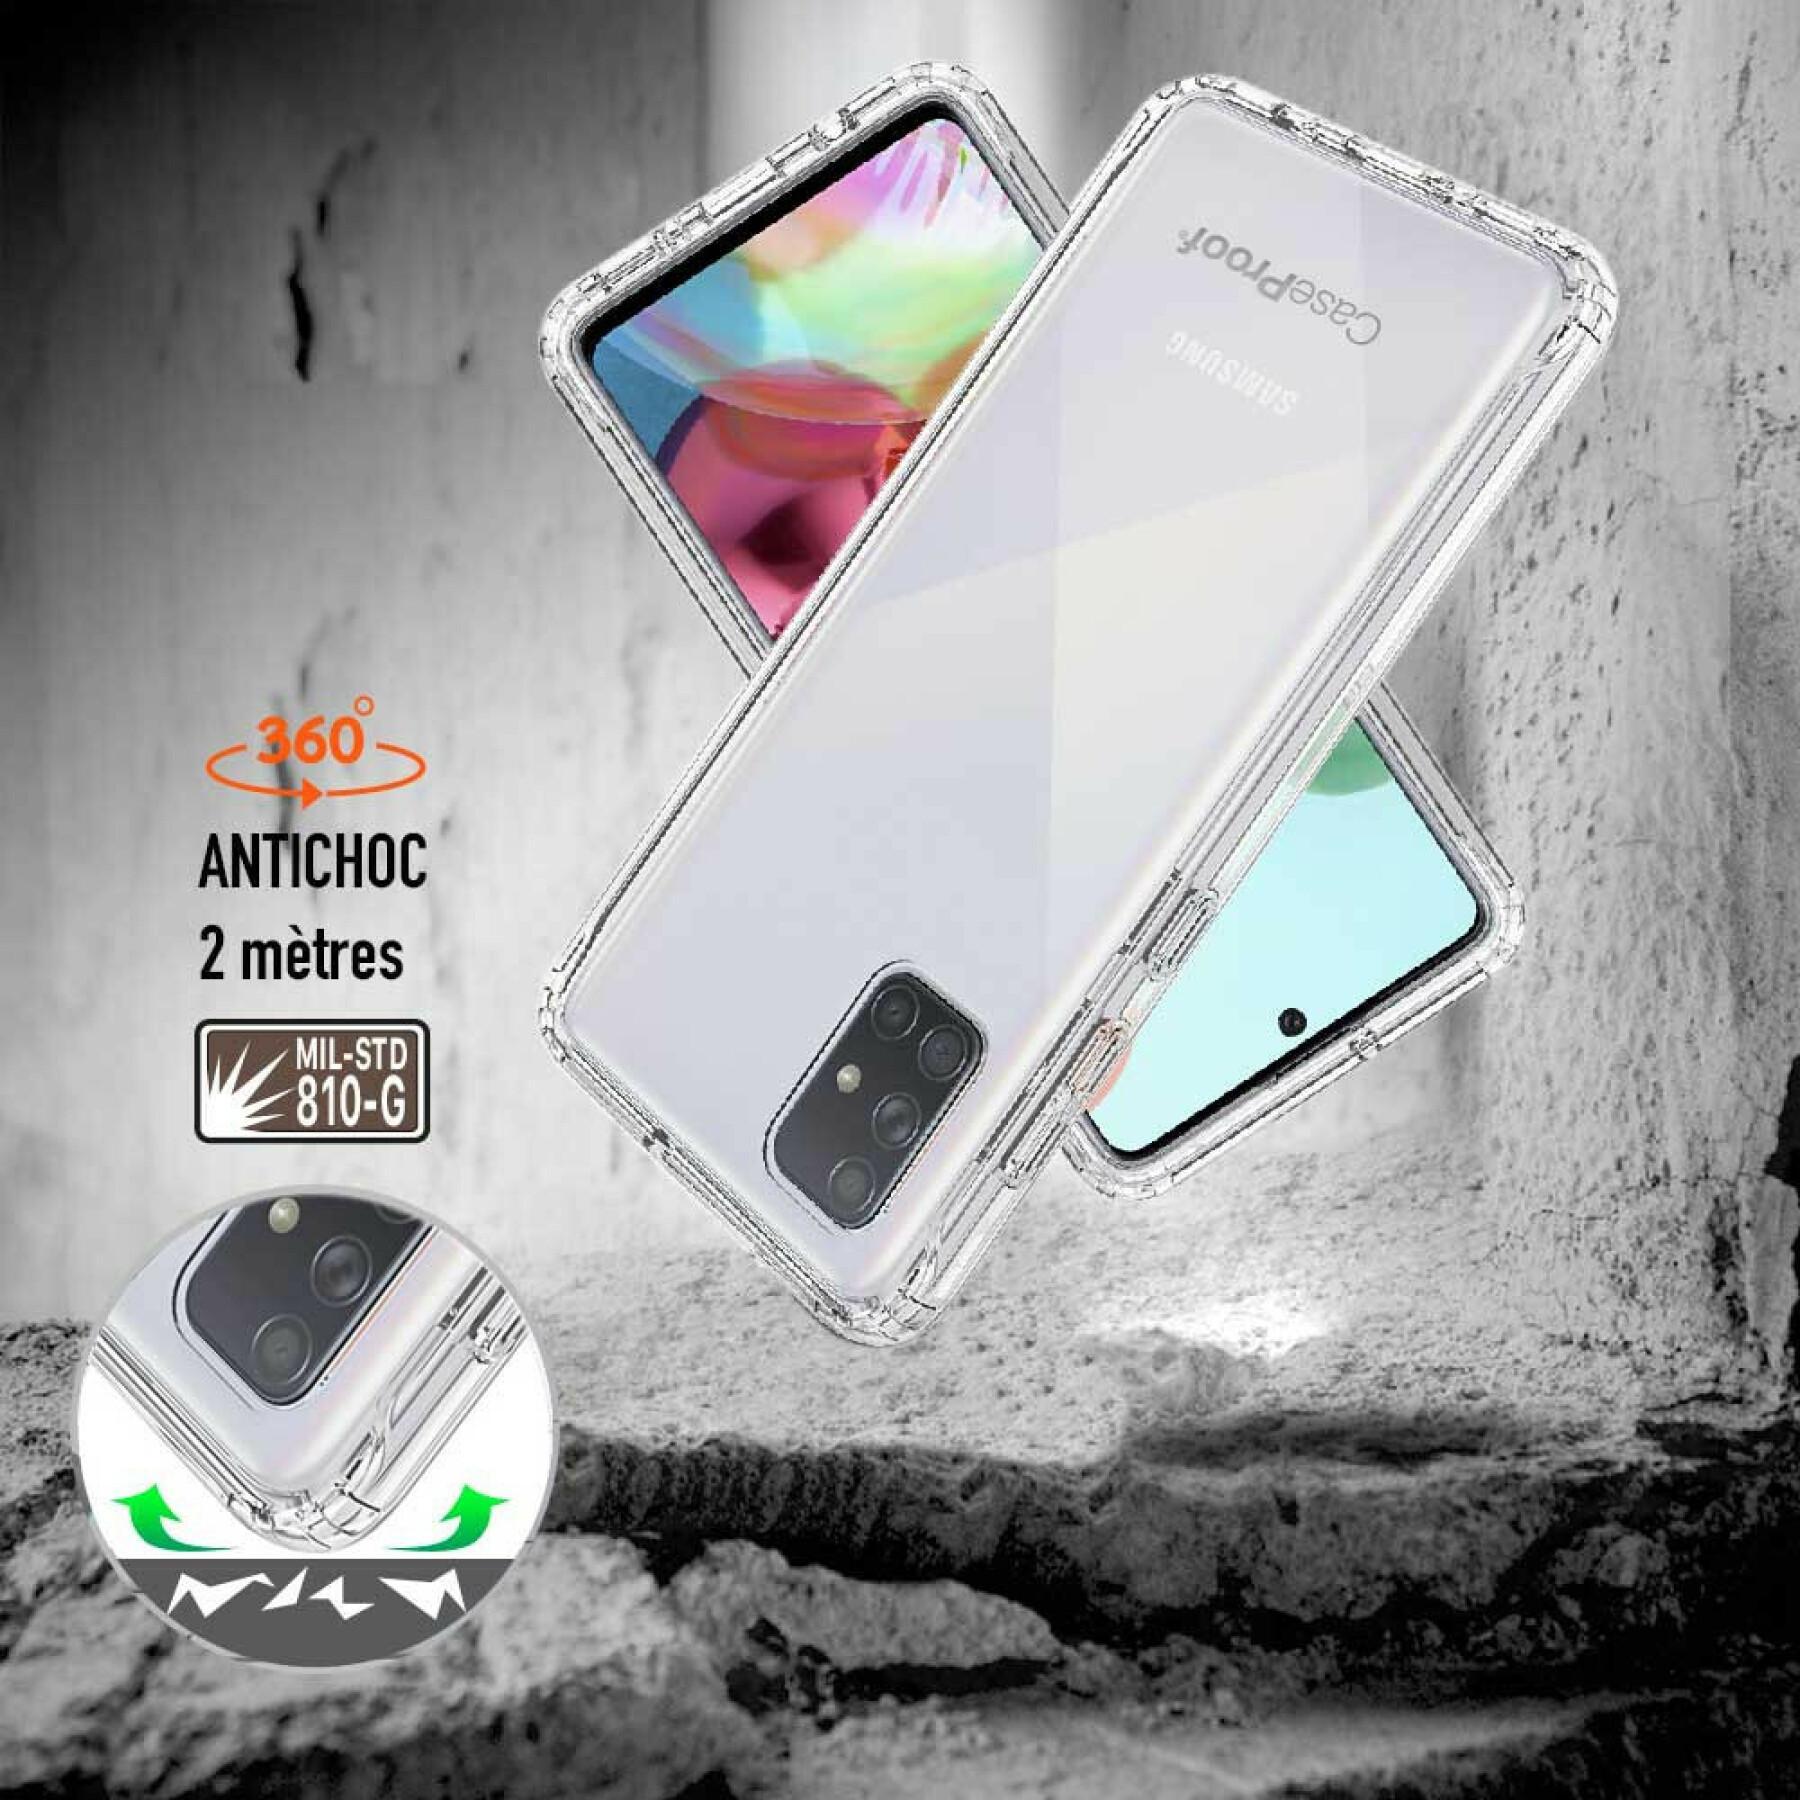 Smartphone case samsung a 71 protection 360°antichoc CaseProof Shock